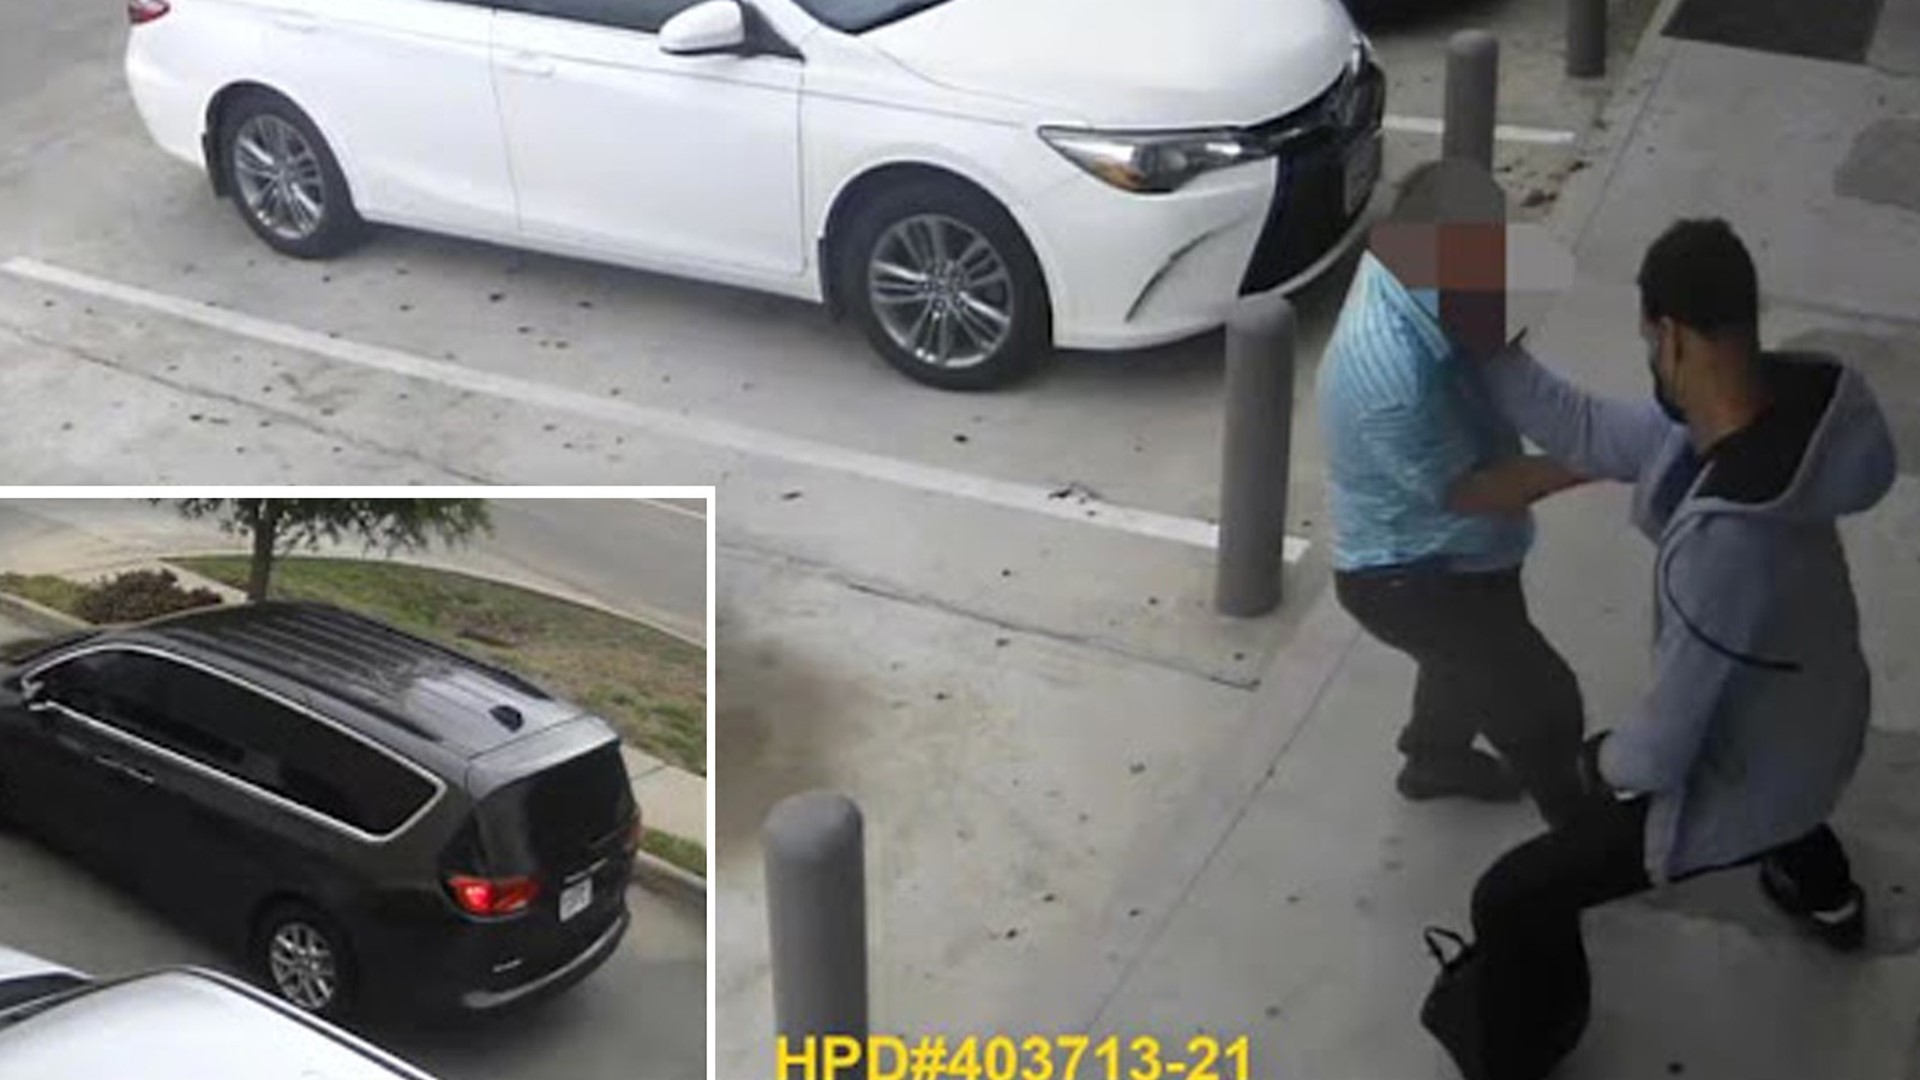 The Houston Police Department on Tuesday released a video of a recent robbery in hopes that someone will recognize the suspect.